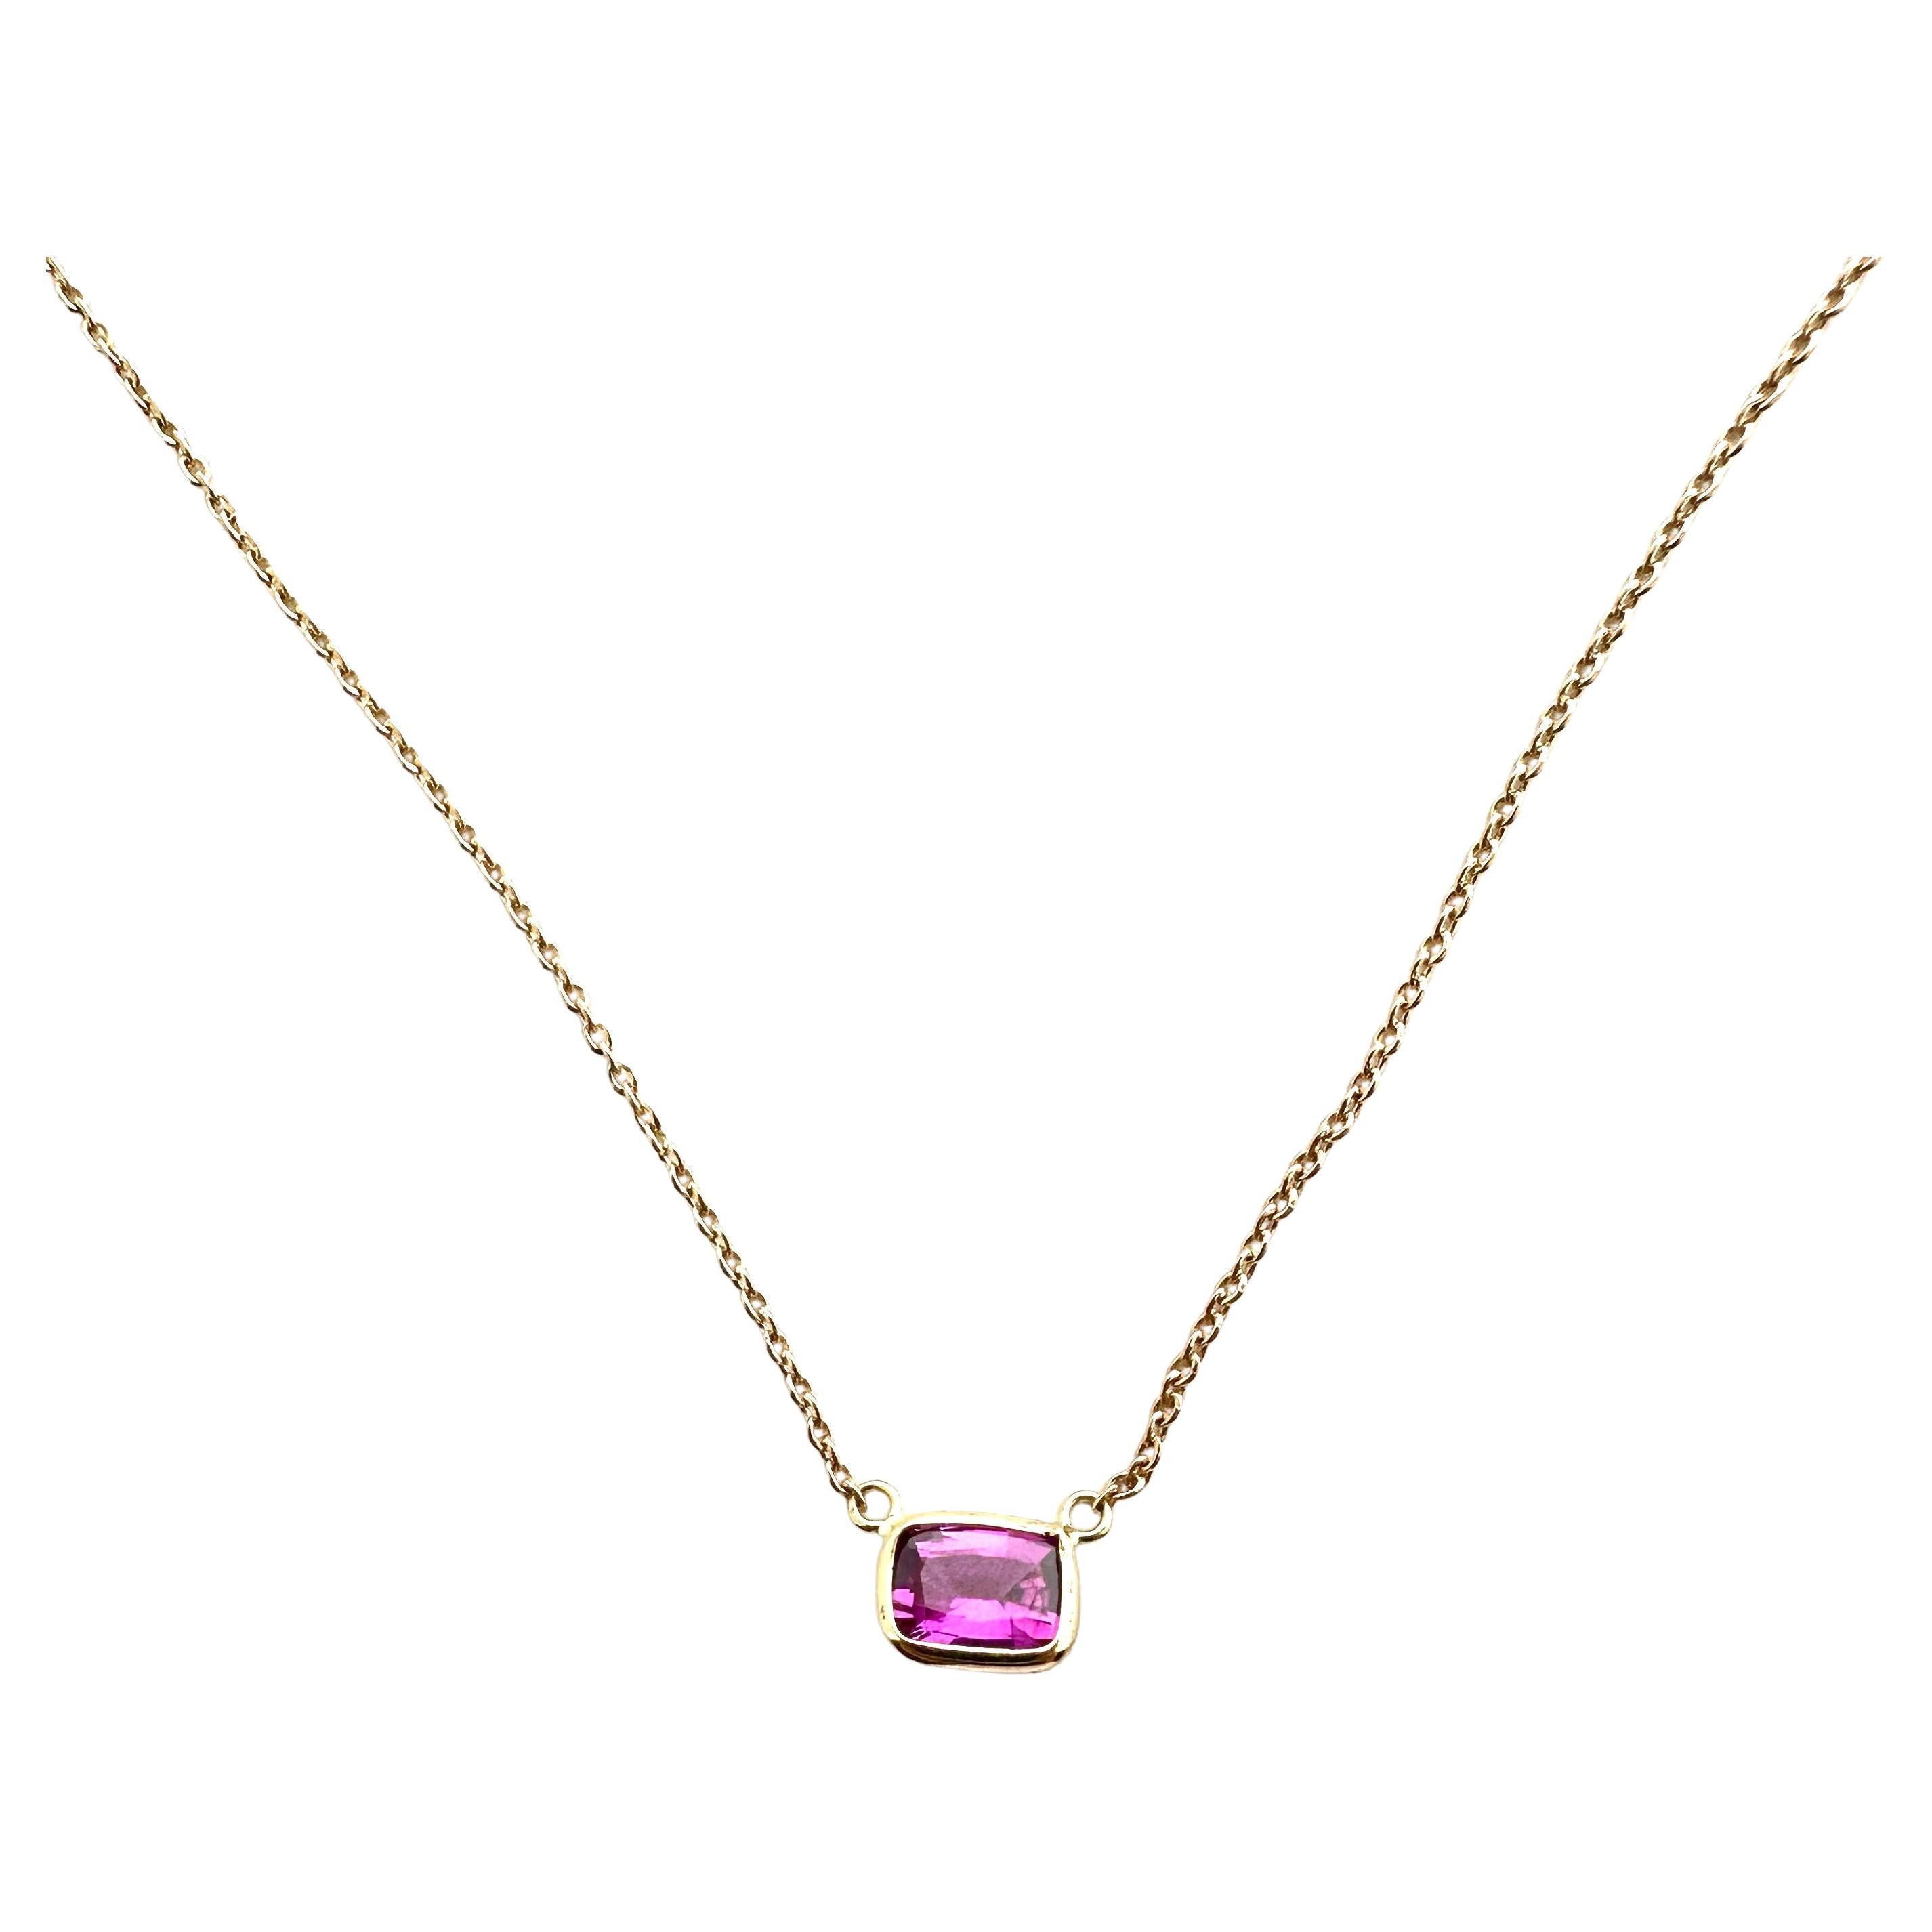 1.21ct. Certified Pink Sapphire Cushion Cut Solitaire Necklace in 14k RG